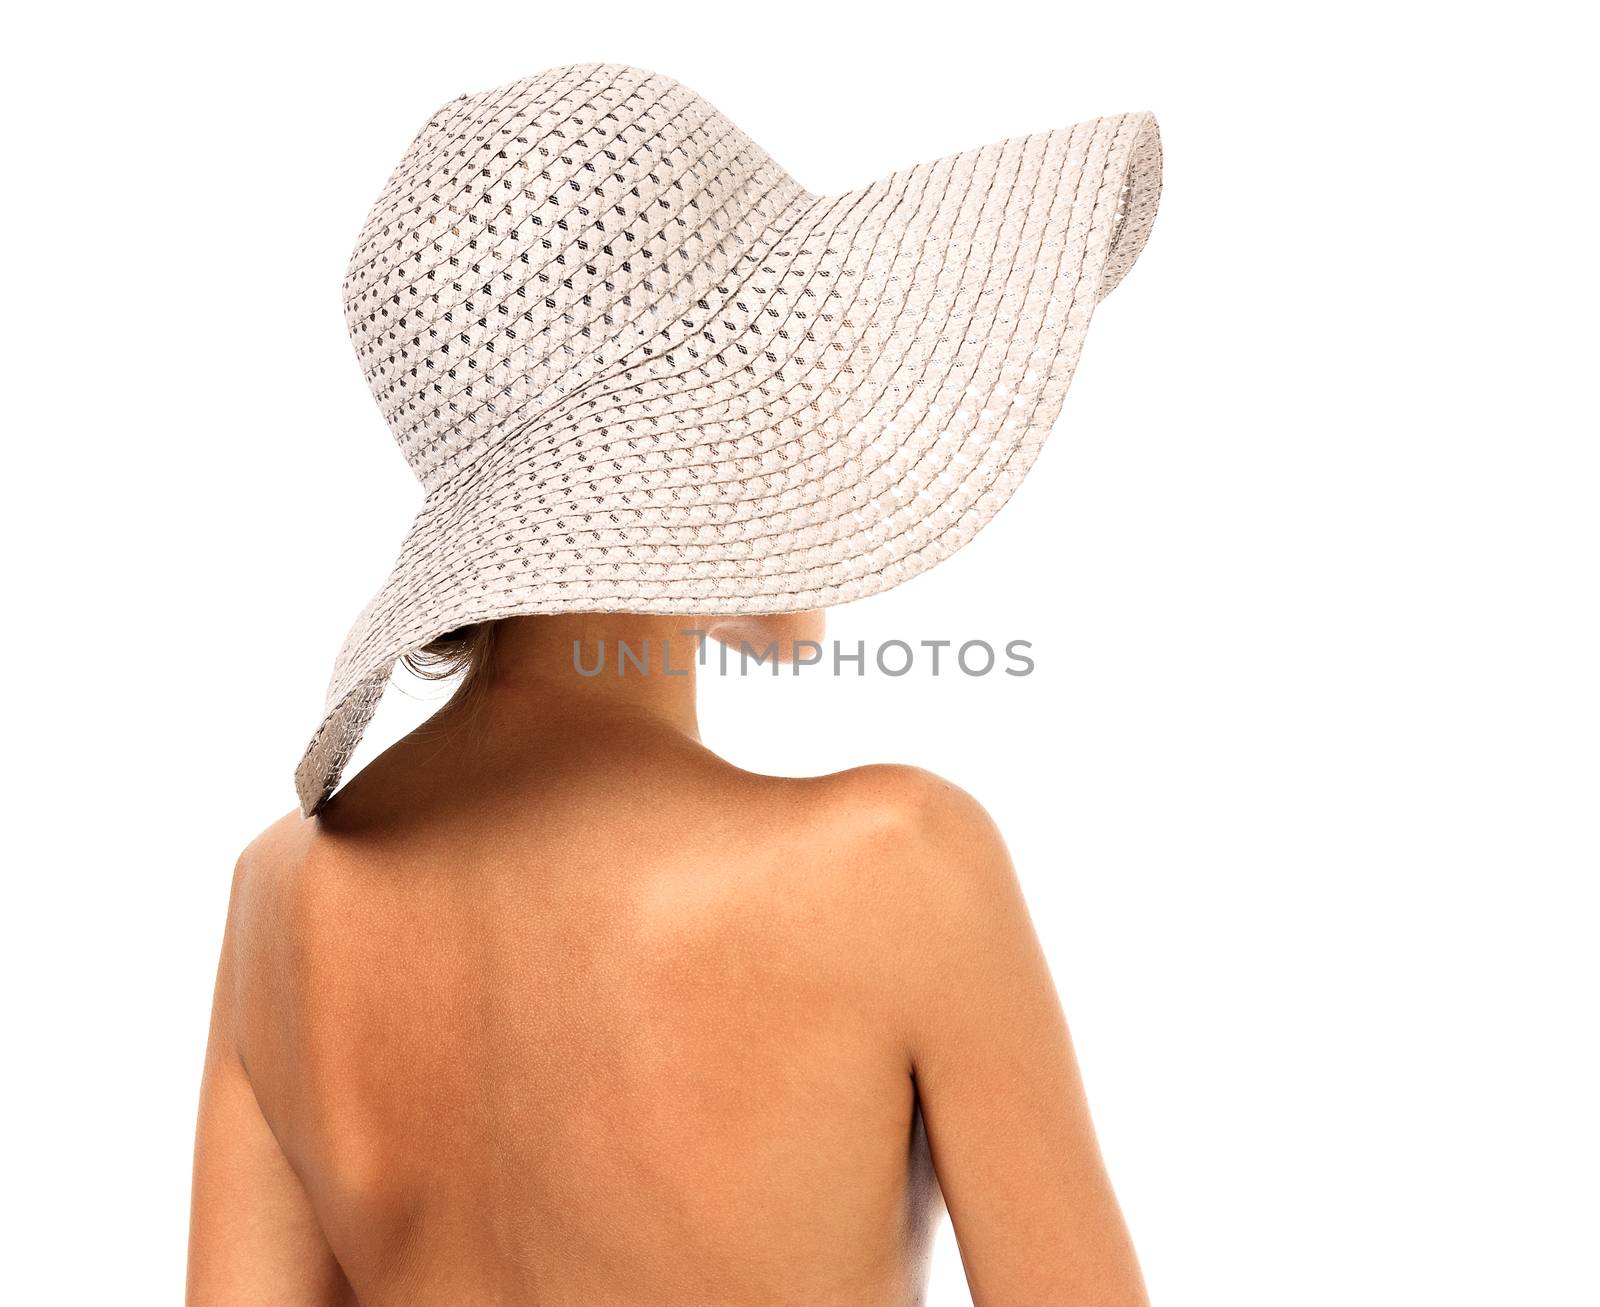 Naked woman in a sunhat, isolated on white background by Nobilior